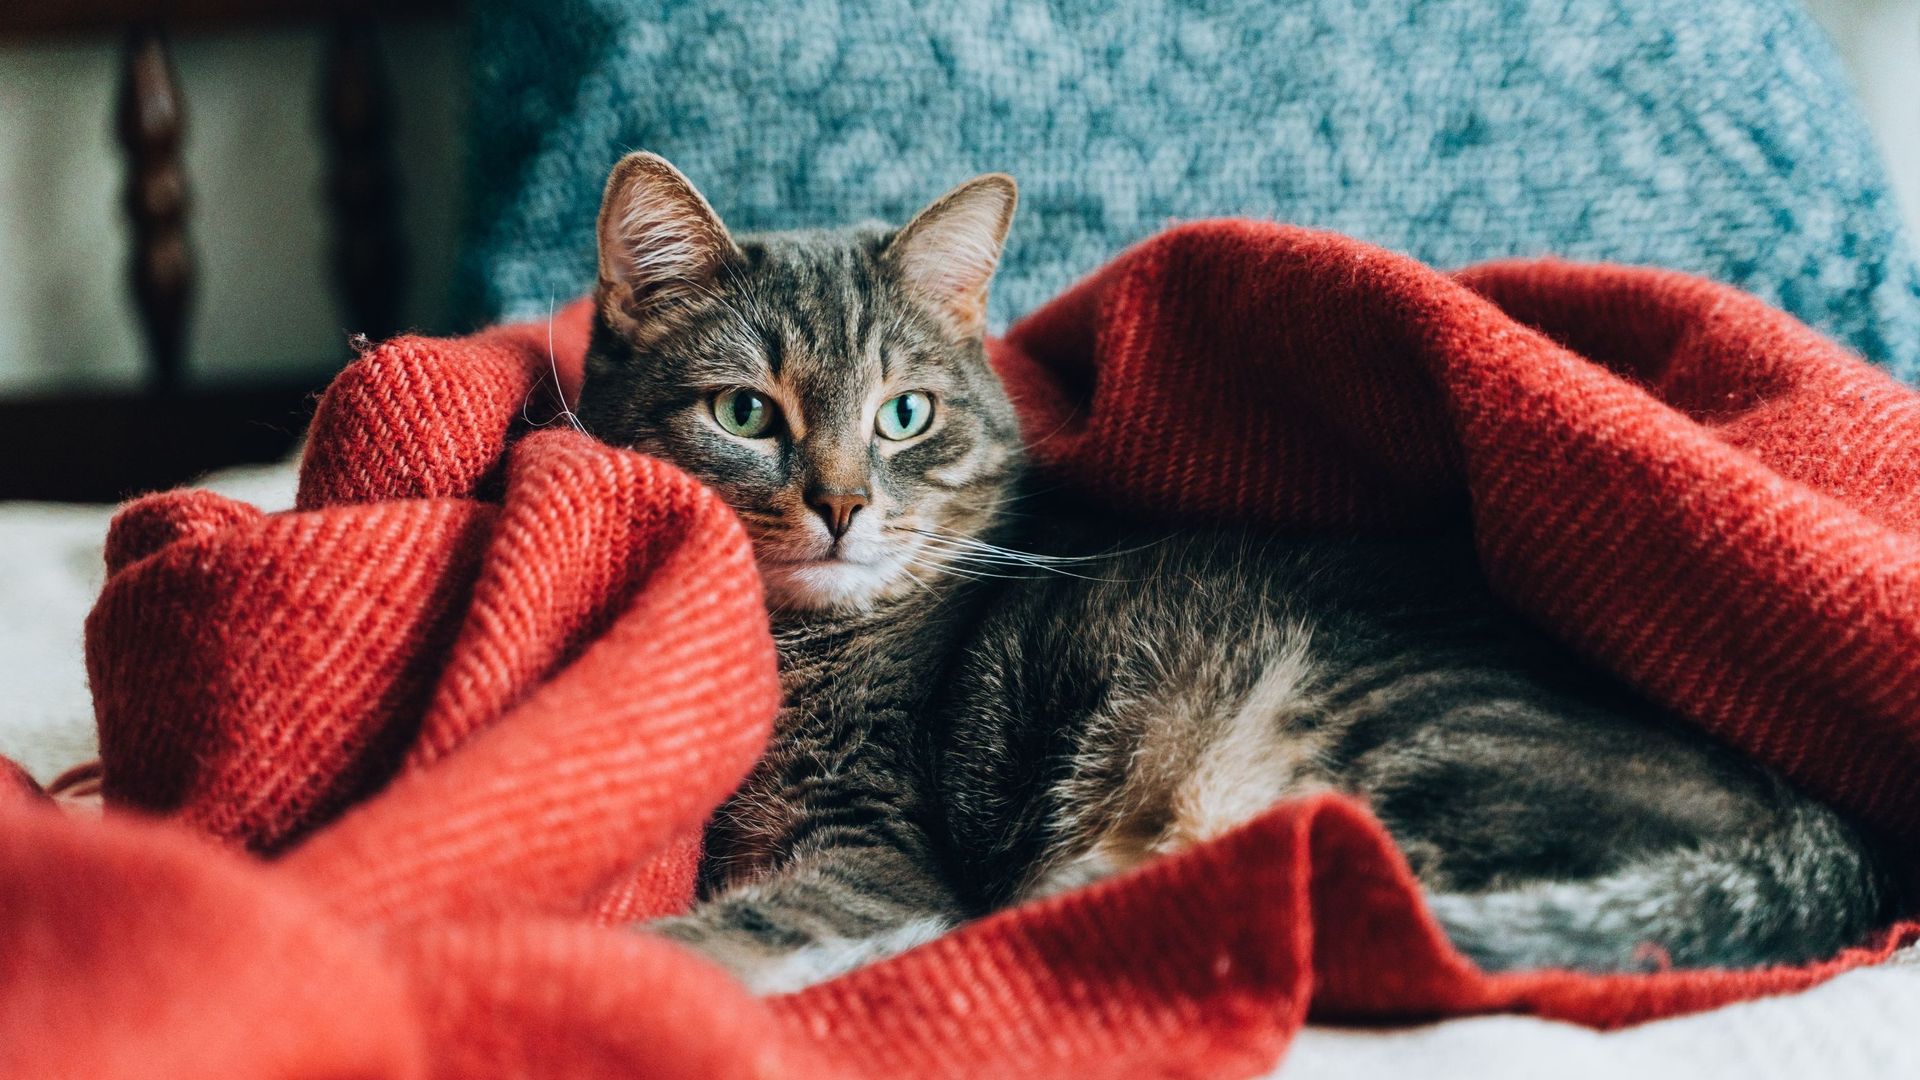 Cute domestic tabby cat lying and resting in red blanket on sofa